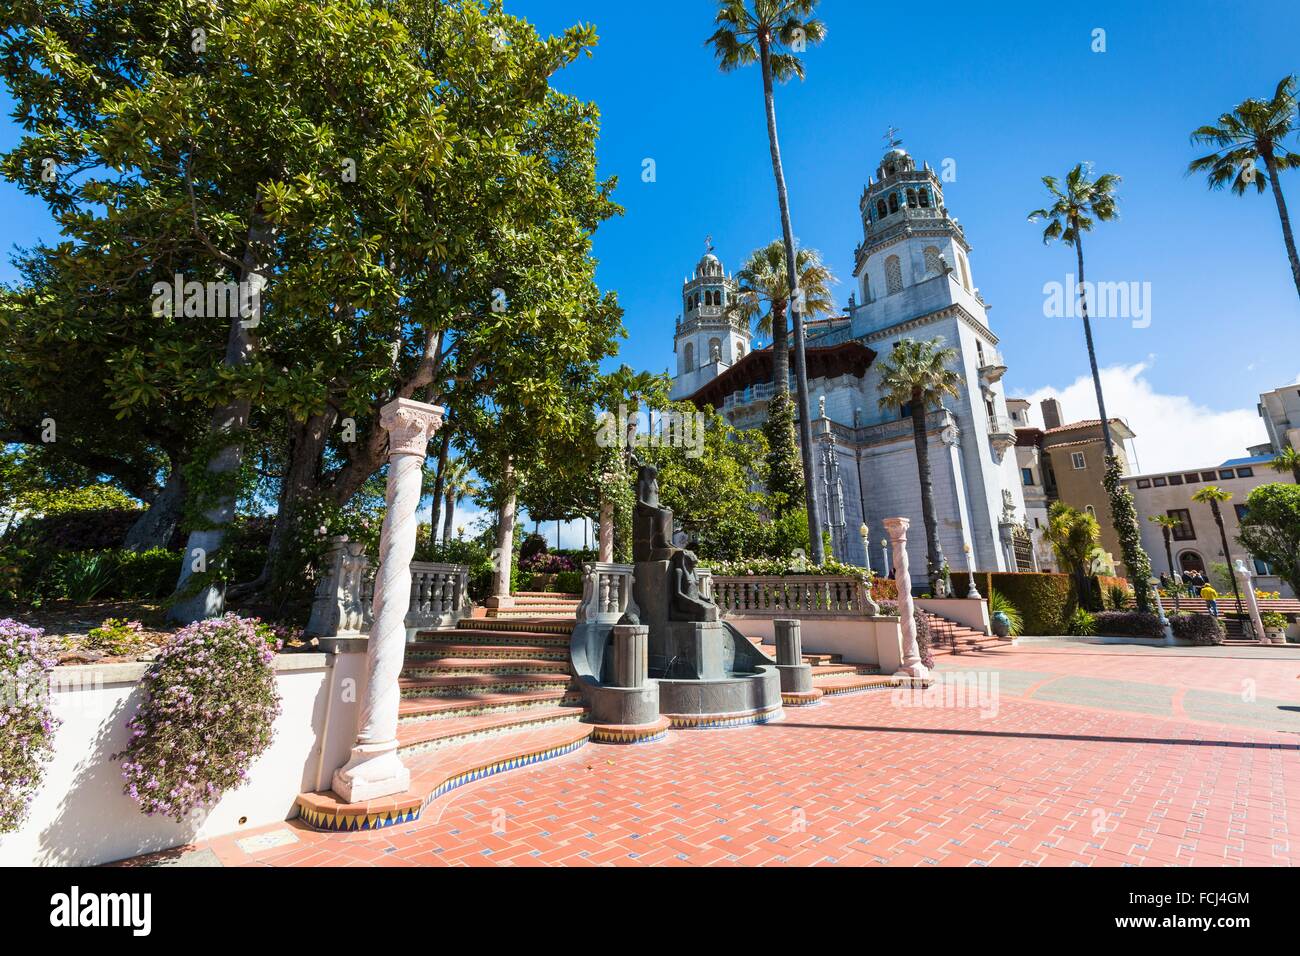 The famous Hearst Castle in California, USA Stock Photo - Alamy